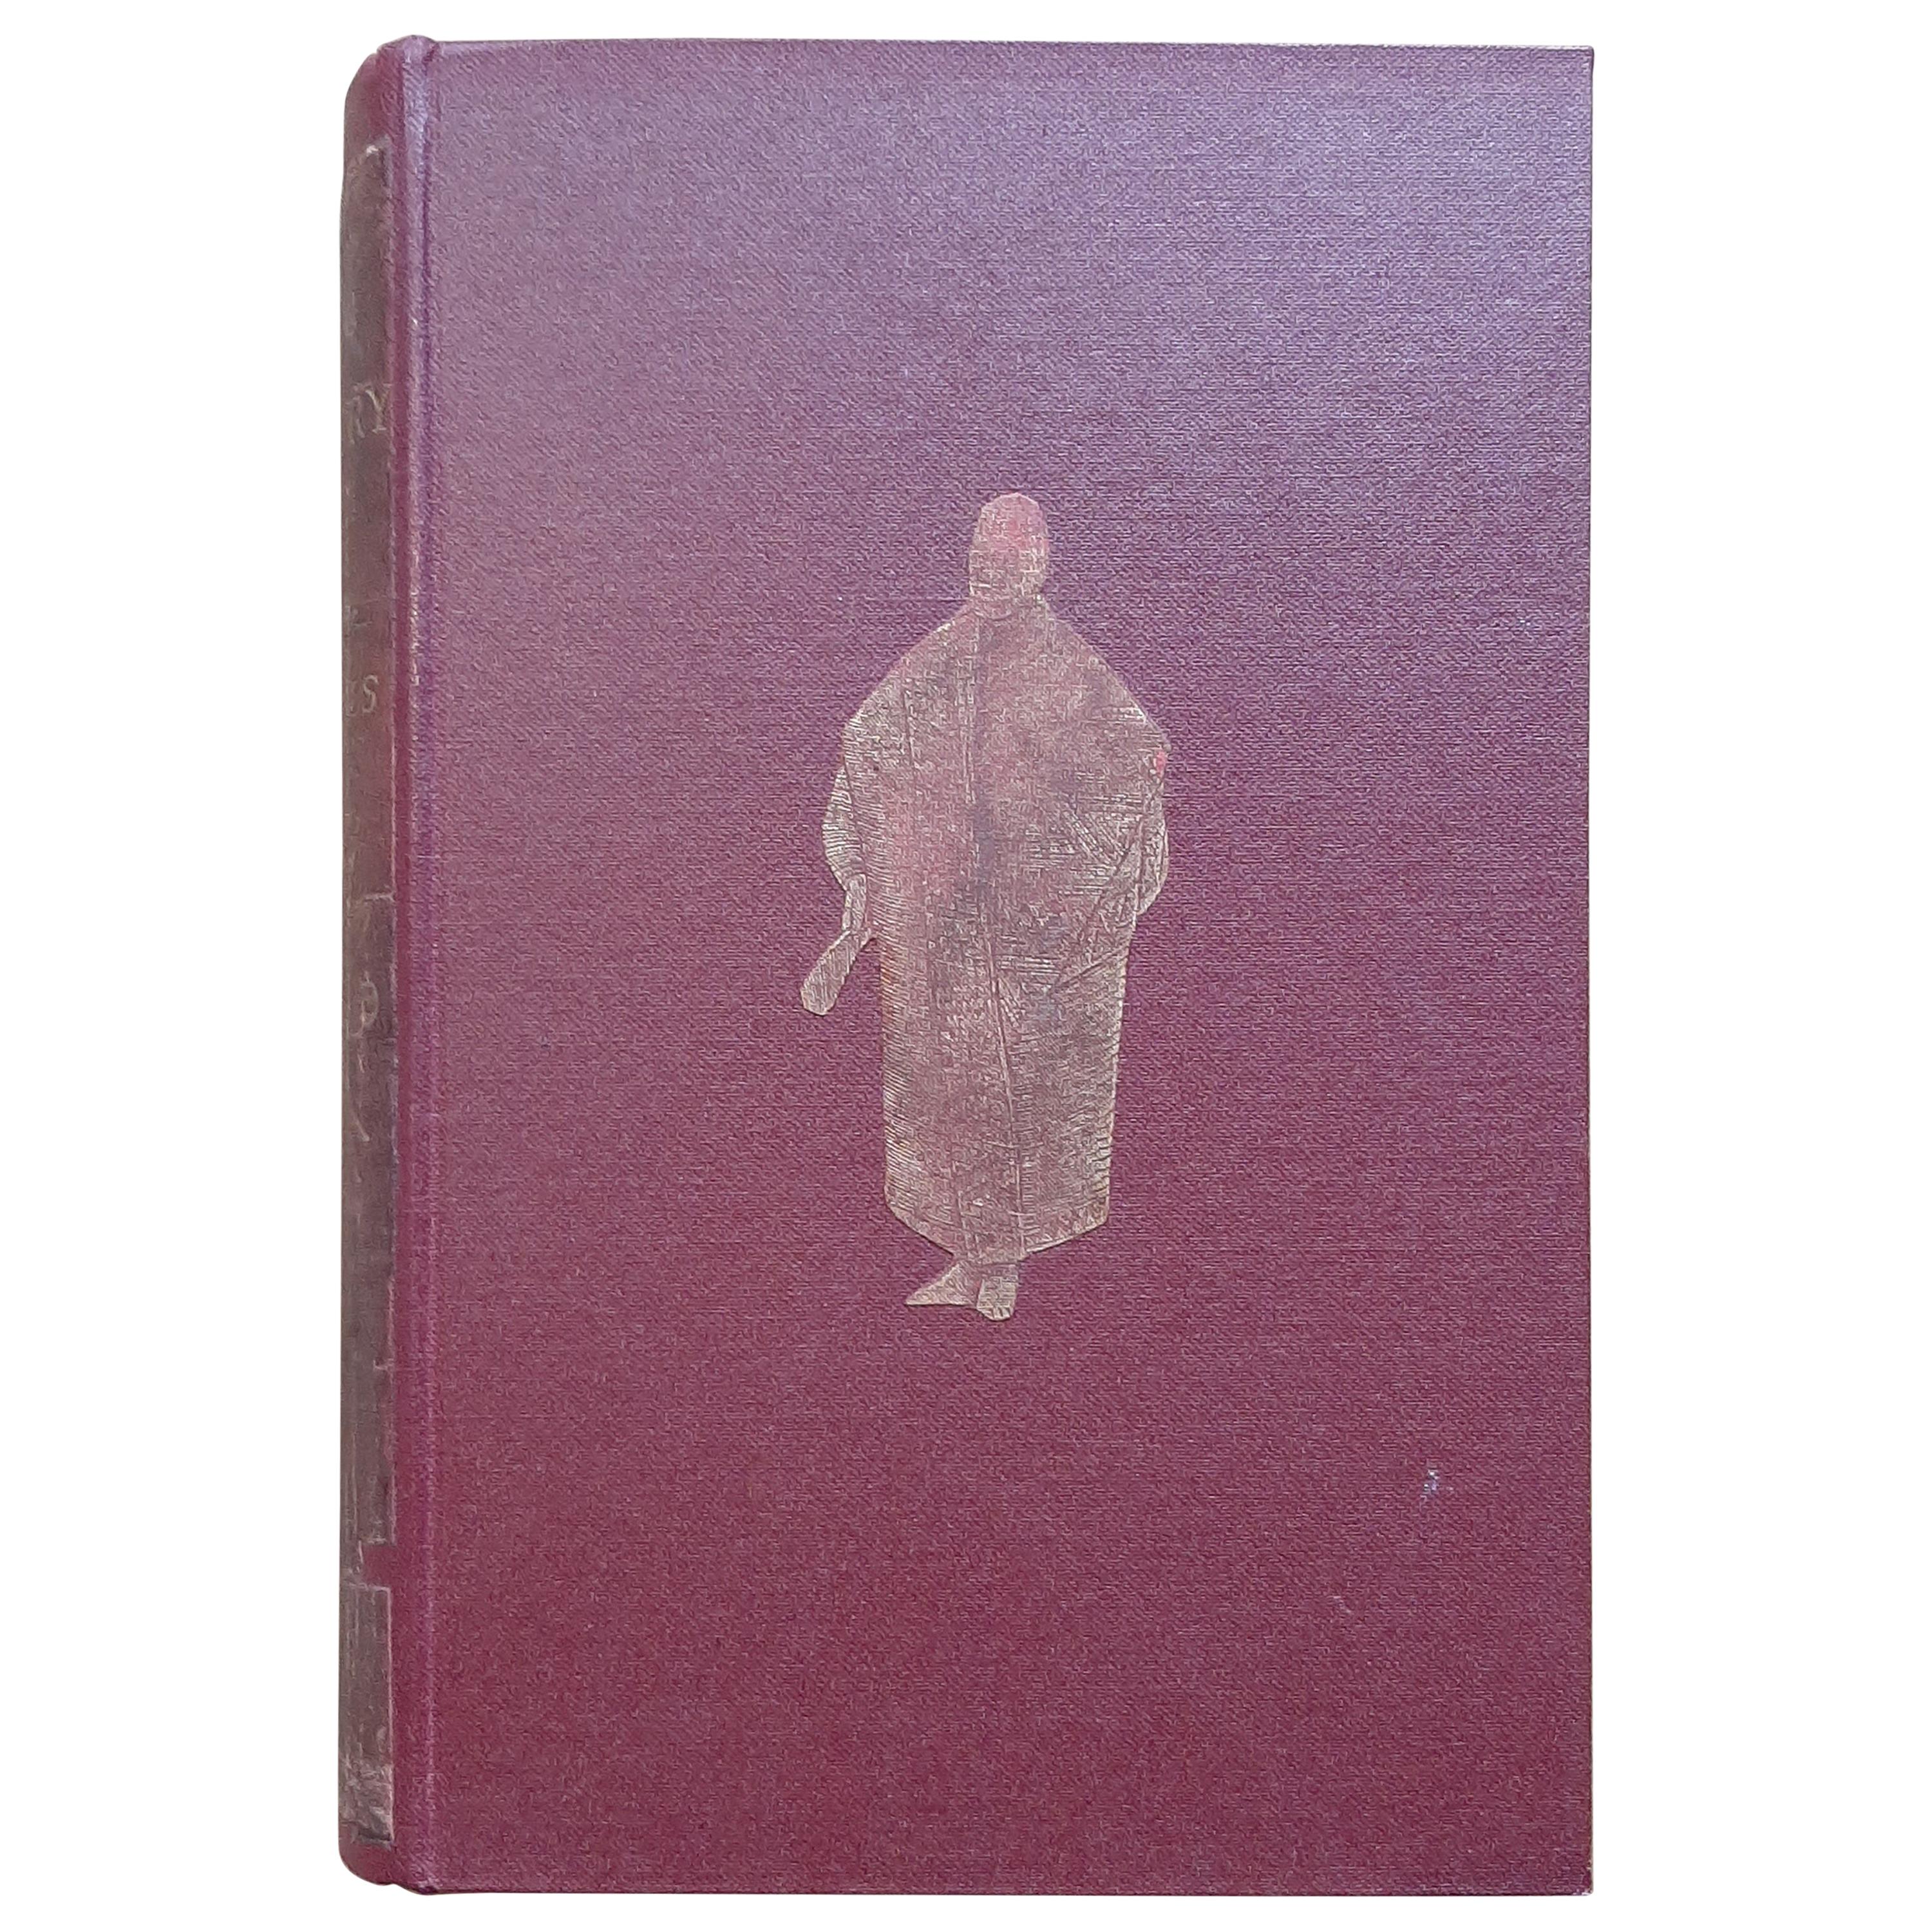 The King-Country; or, Explorations in New-Zealand by Kerry-Nicholls (1884)